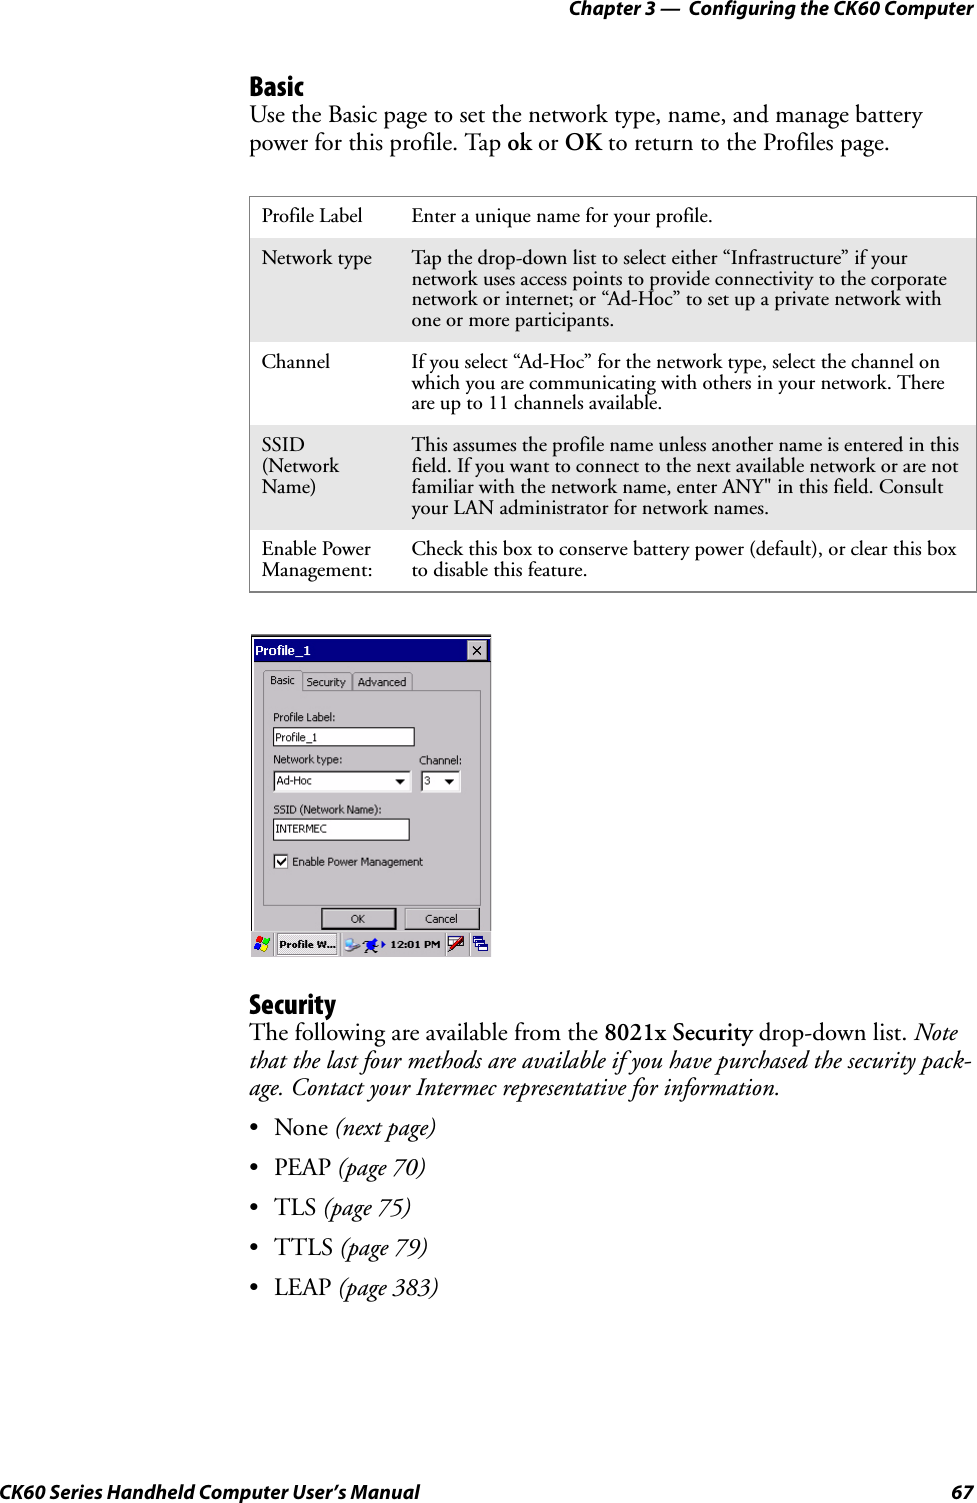 Chapter 3 —  Configuring the CK60 ComputerCK60 Series Handheld Computer User’s Manual 67BasicUse the Basic page to set the network type, name, and manage battery power for this profile. Tap ok or OK to return to the Profiles page.SecurityThe following are available from the 8021x Security drop-down list. Note that the last four methods are available if you have purchased the security pack-age. Contact your Intermec representative for information.•None (next page)•PEAP (page 70)•TLS (page 75)•TTLS (page 79)•LEAP (page 383)Profile Label Enter a unique name for your profile.Network type Tap the drop-down list to select either “Infrastructure” if your network uses access points to provide connectivity to the corporate network or internet; or “Ad-Hoc” to set up a private network with one or more participants.Channel If you select “Ad-Hoc” for the network type, select the channel on which you are communicating with others in your network. There are up to 11 channels available.SSID (Network Name)This assumes the profile name unless another name is entered in this field. If you want to connect to the next available network or are not familiar with the network name, enter ANY&quot; in this field. Consult your LAN administrator for network names.Enable Power Management:Check this box to conserve battery power (default), or clear this box to disable this feature.